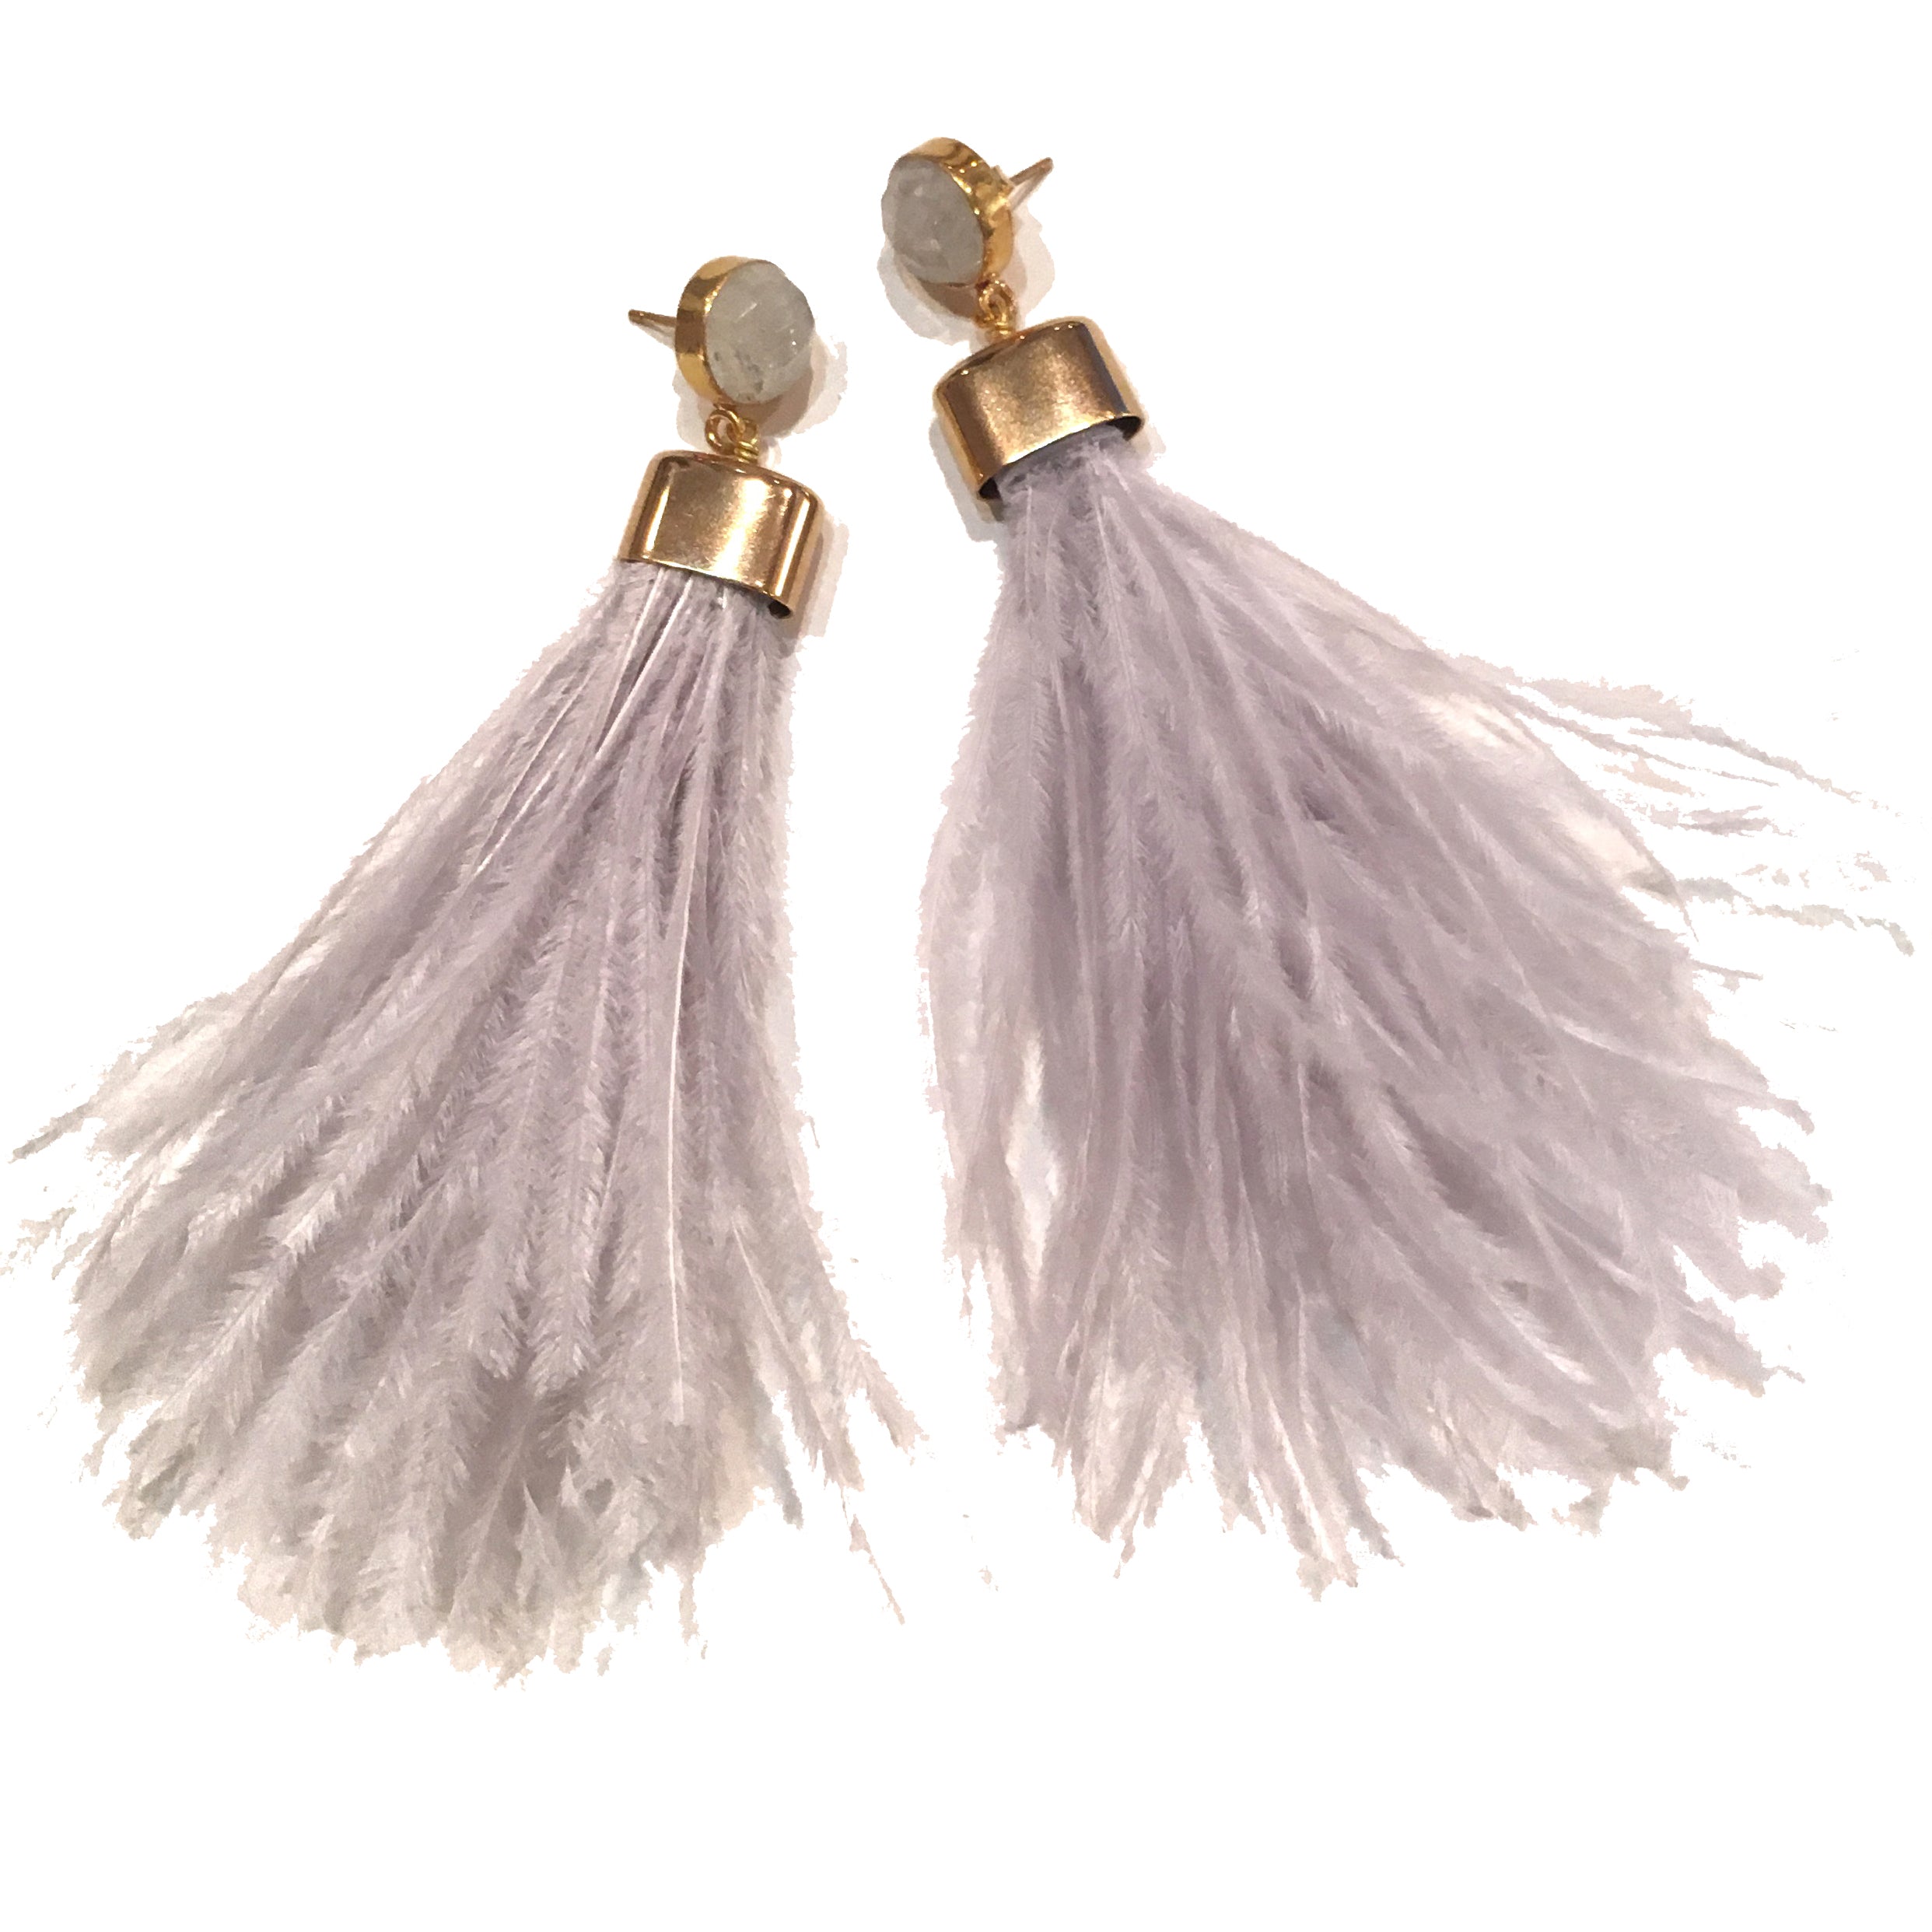 Buy Ostrich Feather Earrings, Long Feather Earrings, White Feather Earrings,  Red Tassel Earrings, Boho Wedding Earrings, Long Tassel Earrings Online in  India - Etsy